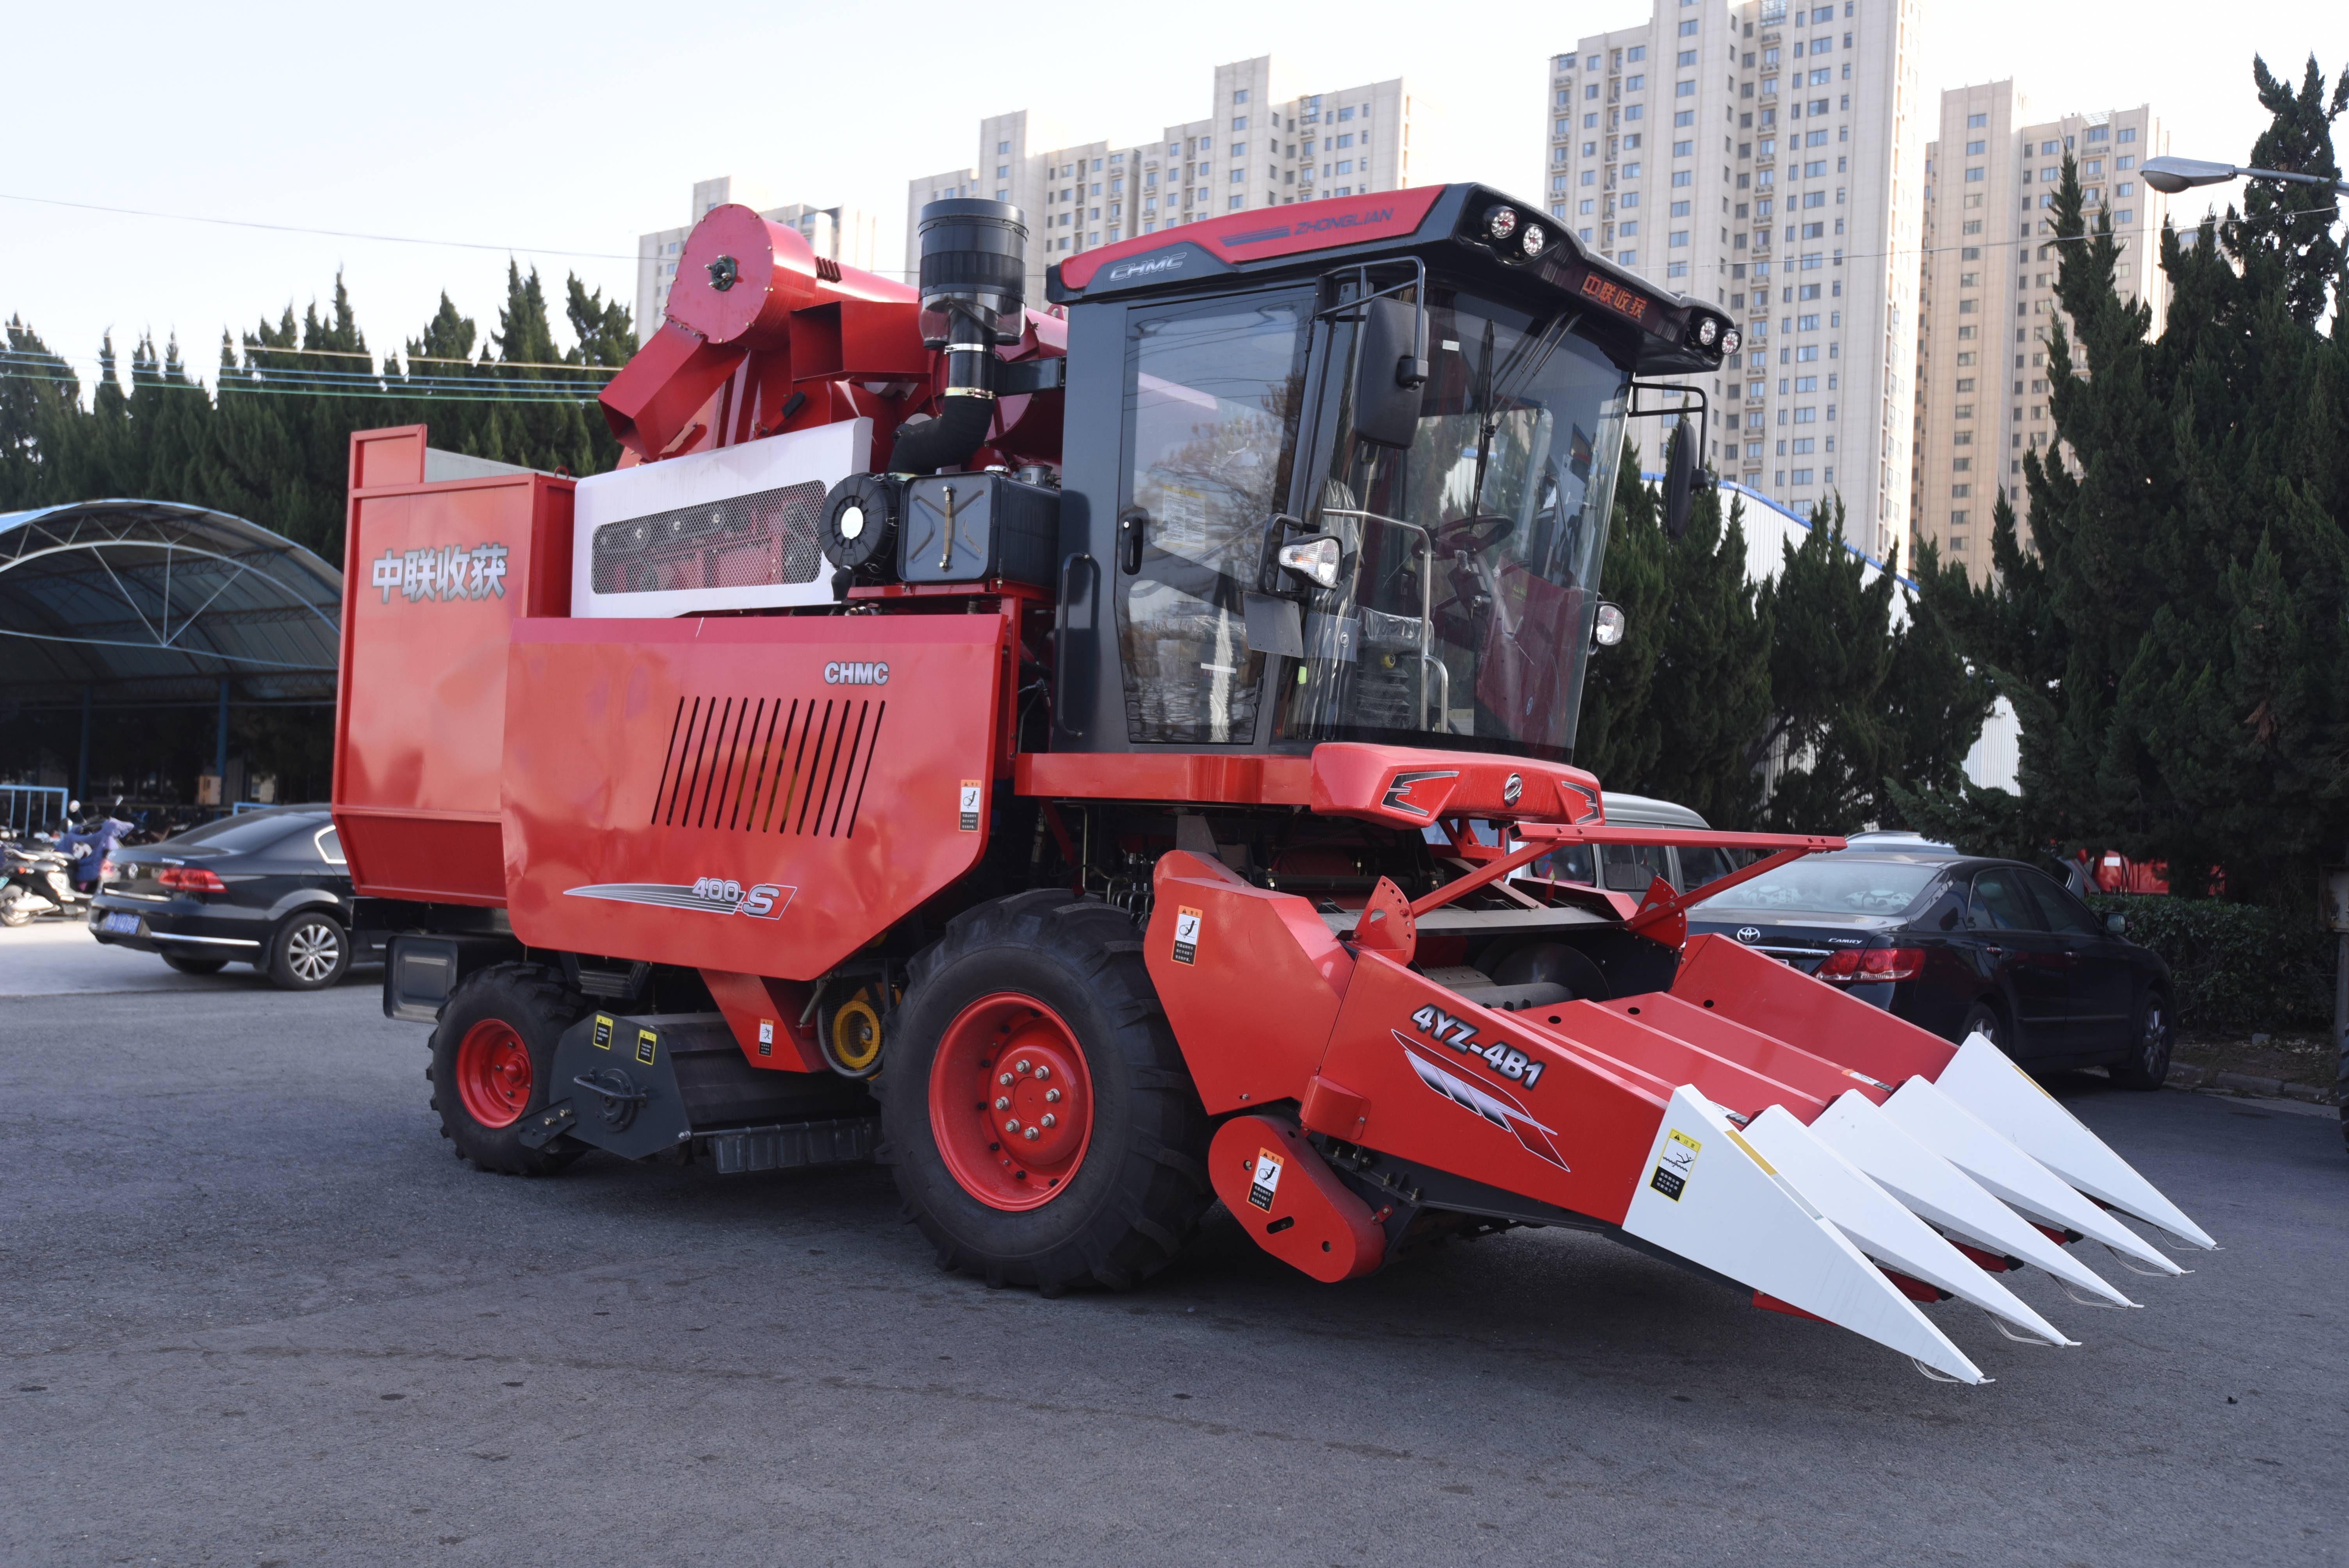 Super-powerful and Latest Model of Large Corn Harvester For Farms Fully Automatic